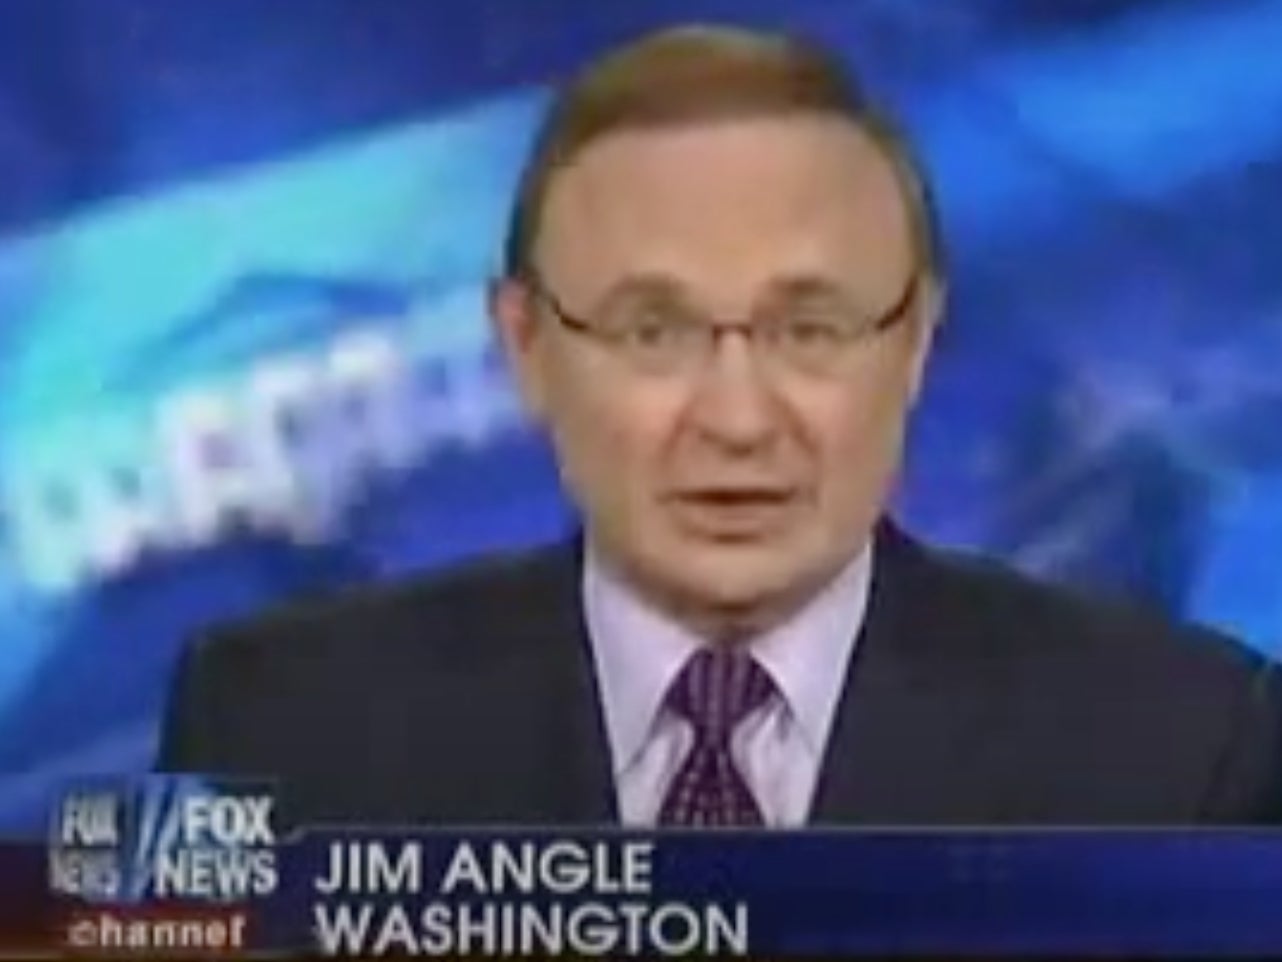 Fox News anchor Jim Angle, who has died aged 75